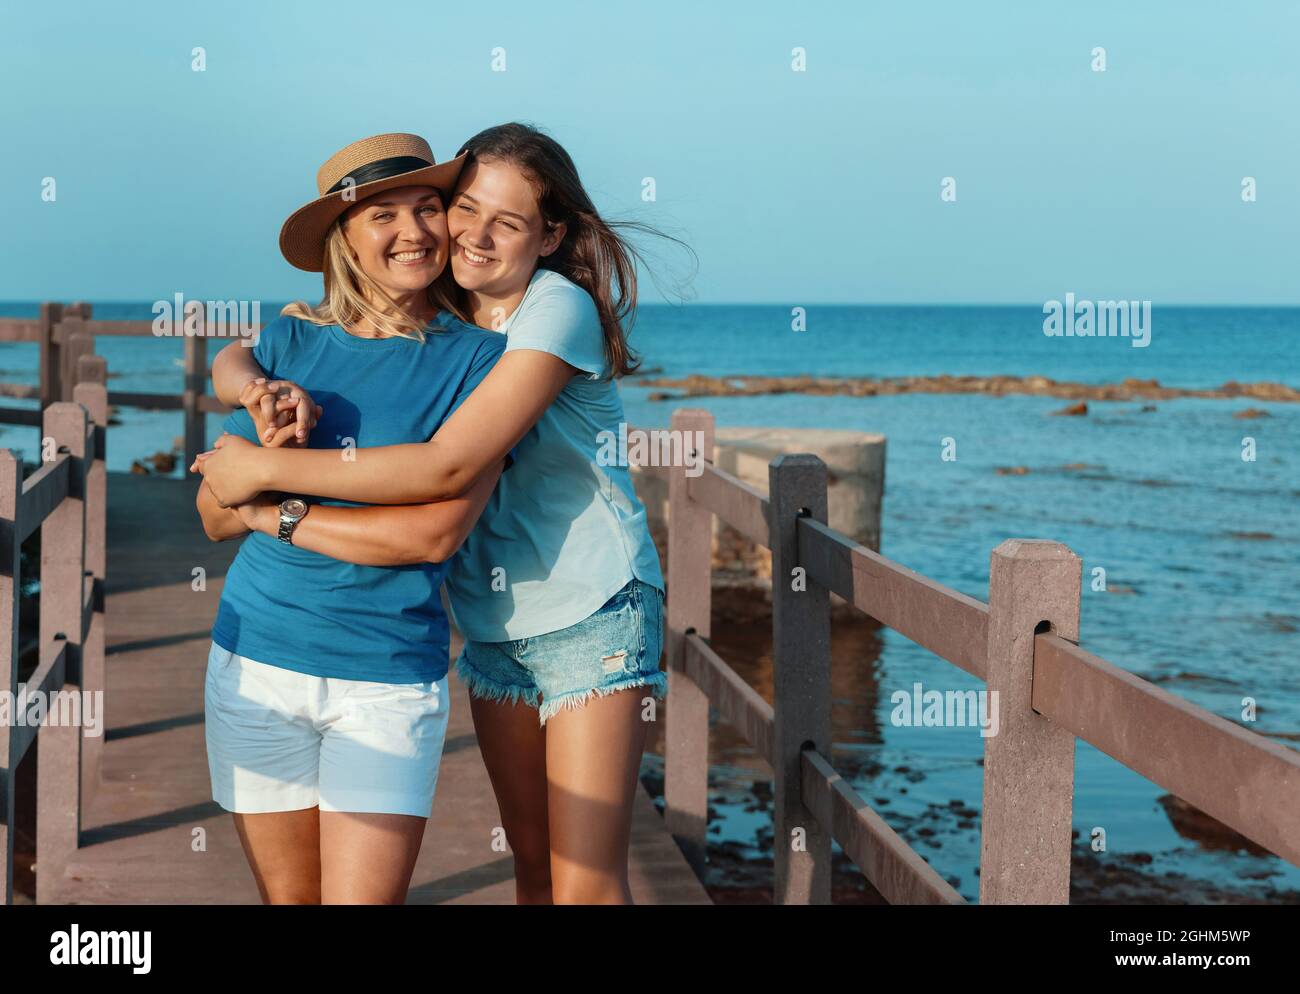 Daughter embracing Mother and standing on wooden sidewalk by the sea at sunset. A middle-aged woman and teenage girl standing side by side and wearing Stock Photo